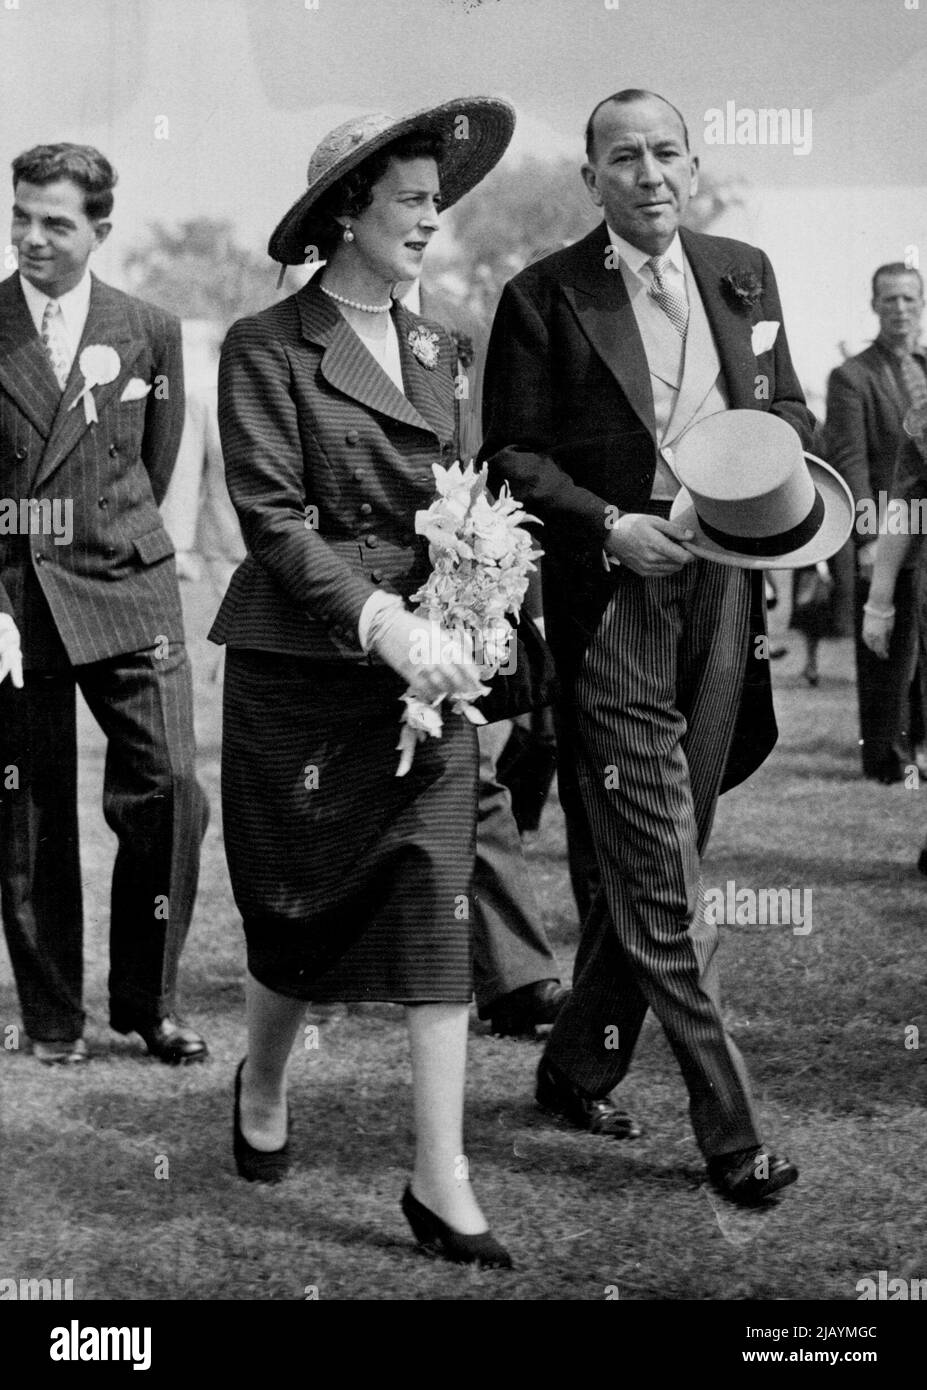 Duchess of Kent Meets Mr. Crowd at Theatre Carnival - The Duchess of Kent wears a wide brimmed hat of dark straw as she is conducted round the Film and Theatre Carnival at Roehampton, today, by stage writer Noel Coward. June 02, 1950. (Photo by Fox Photos). Stock Photo